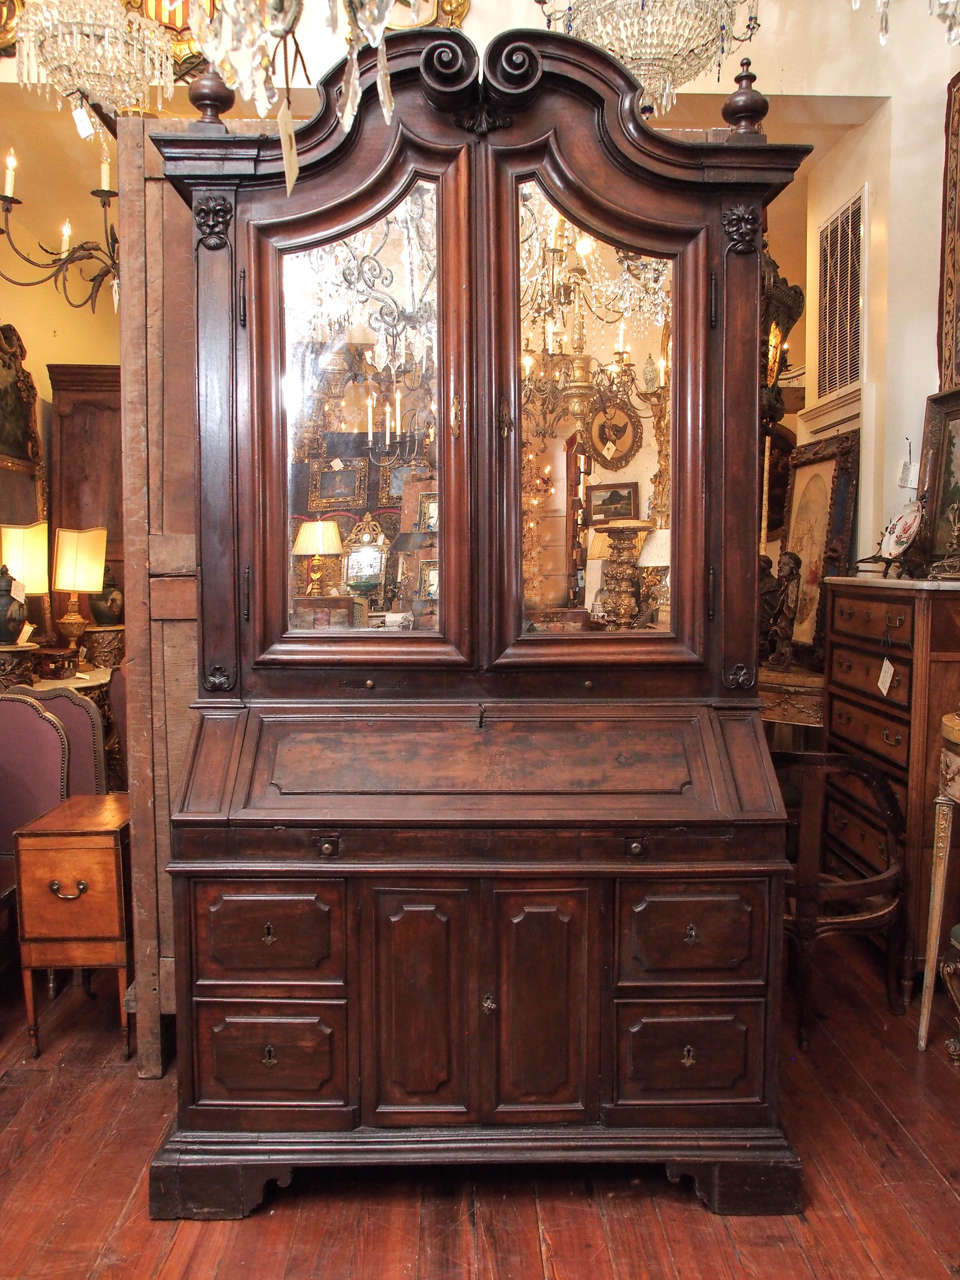 Late 17th century-early 18th century Italian walnut secretaire bookcase with mirrored doors and pediment top.